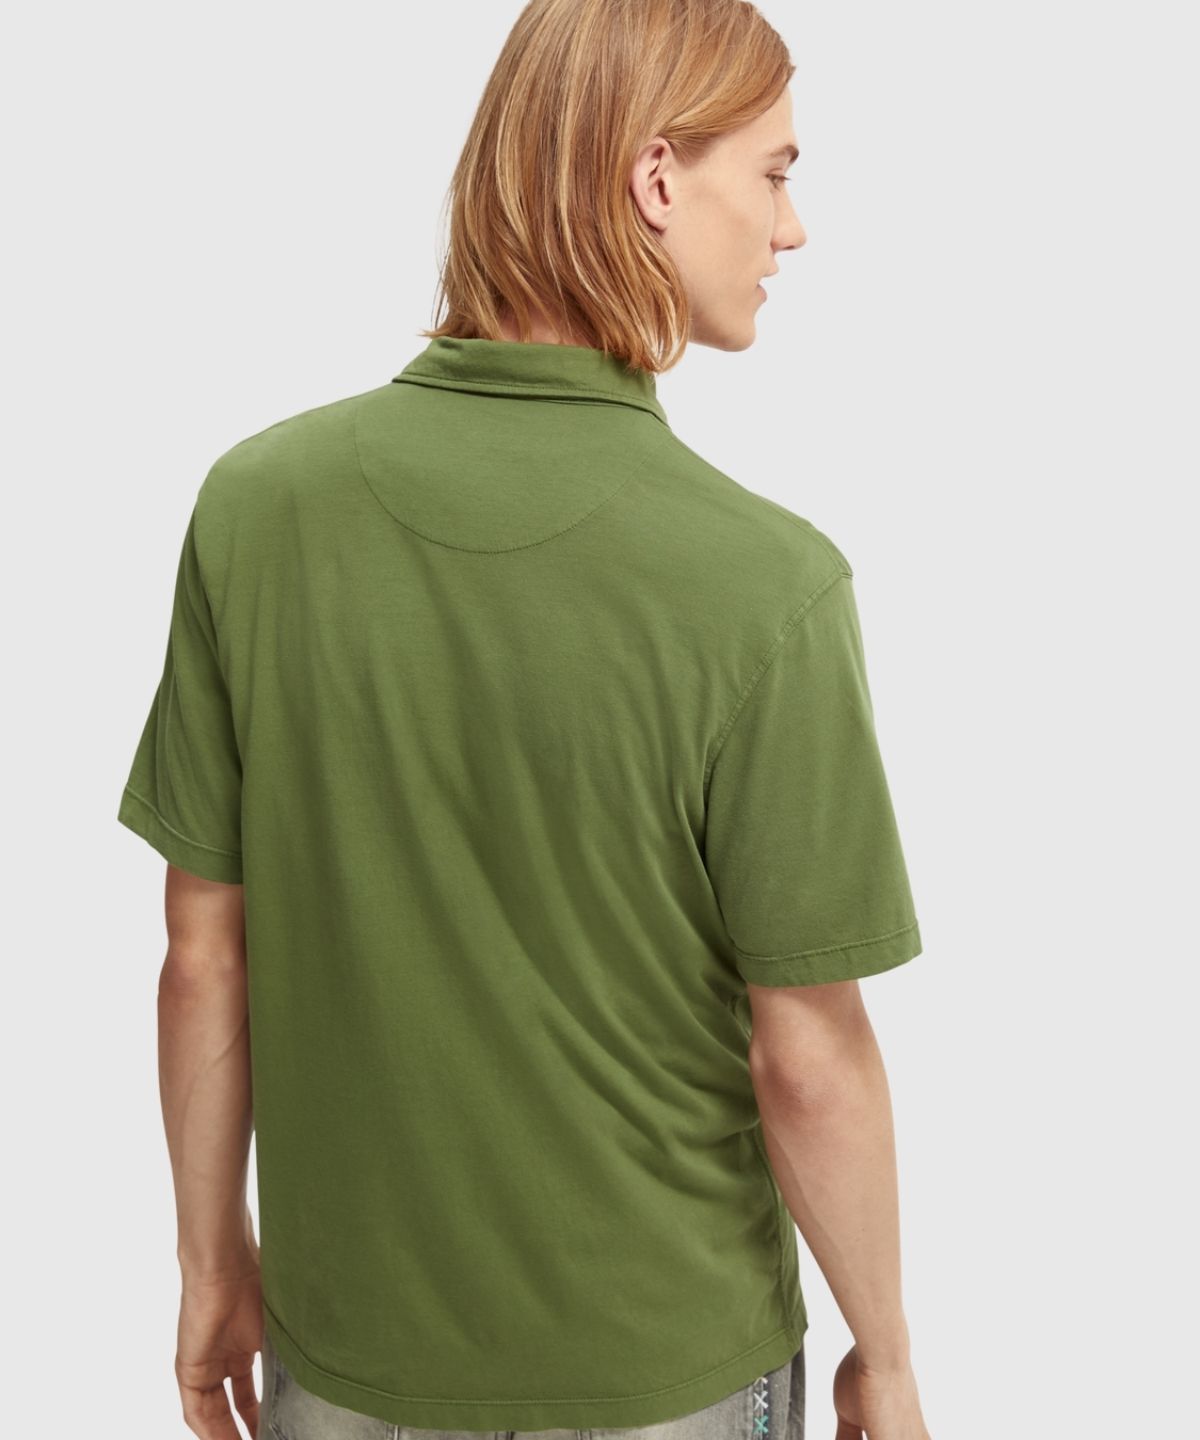 Garment-Dyed Jersey Polo In Organic Cotton